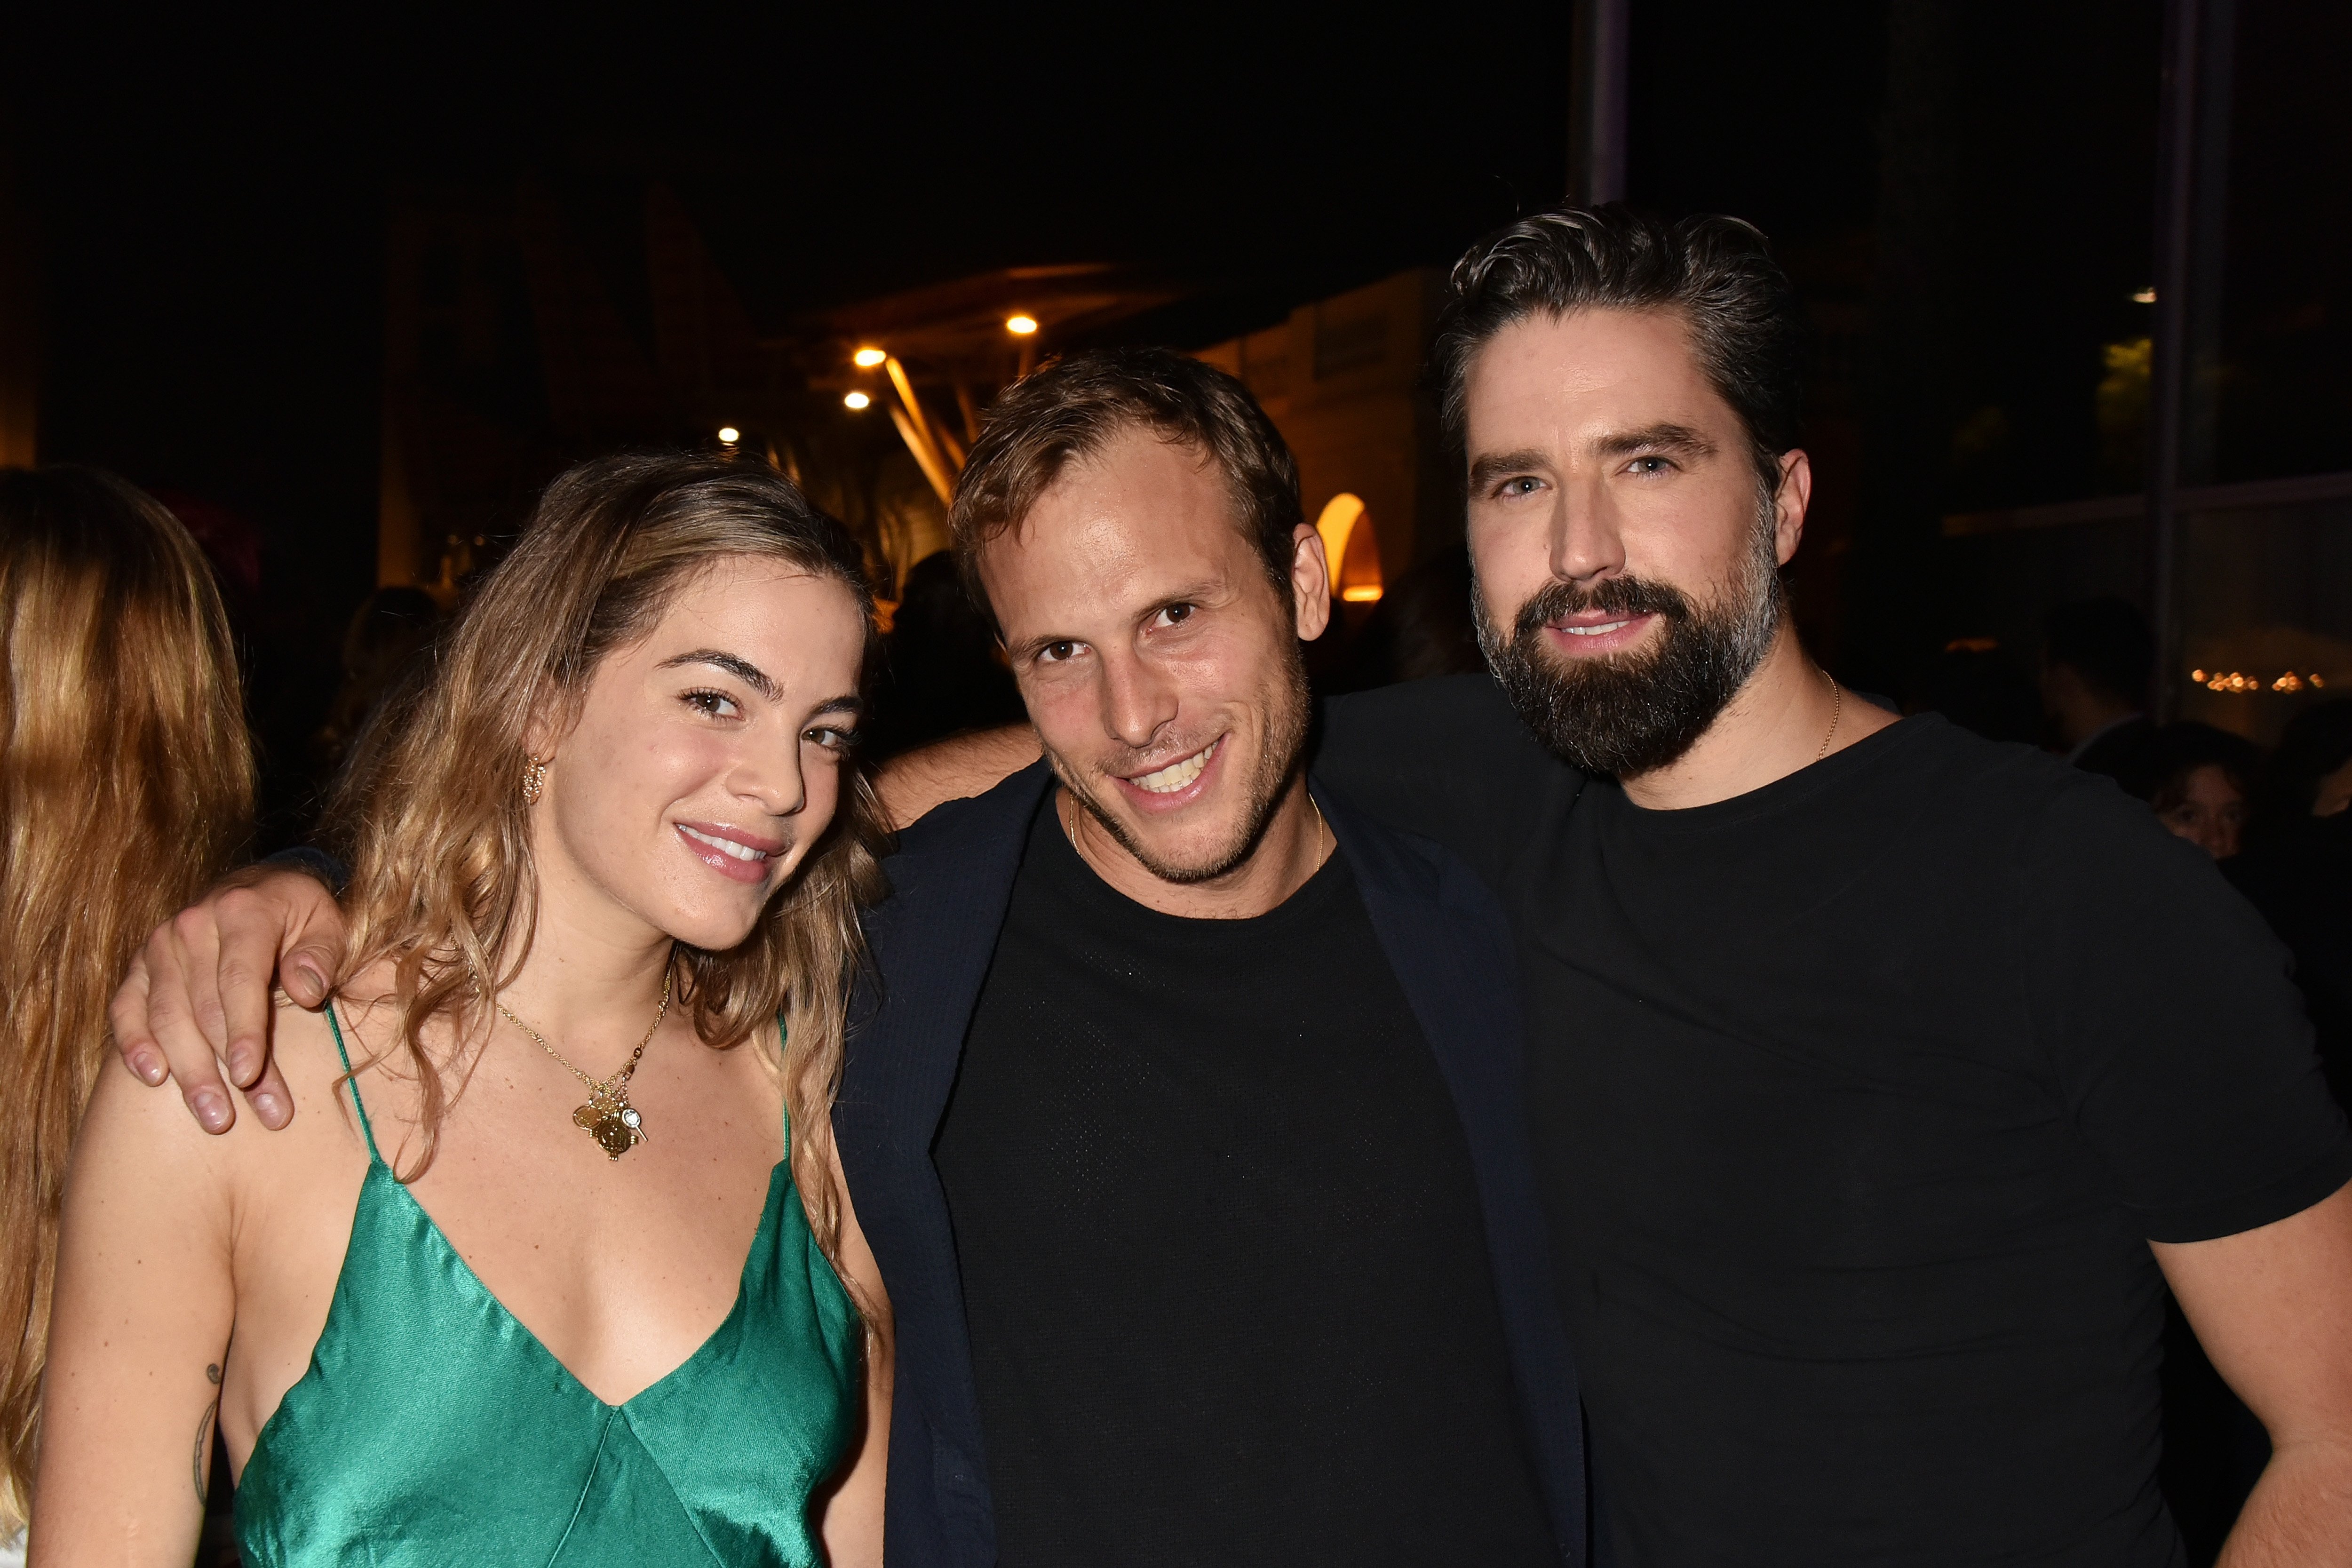     (L-R) Chelsea Leyland, Jordan Burrows and Jack Guinness attend the Barcelona EDITION Launch Party on September 20, 2018 in Barcelona, ​​Spain.  |  Source: Getty Images 